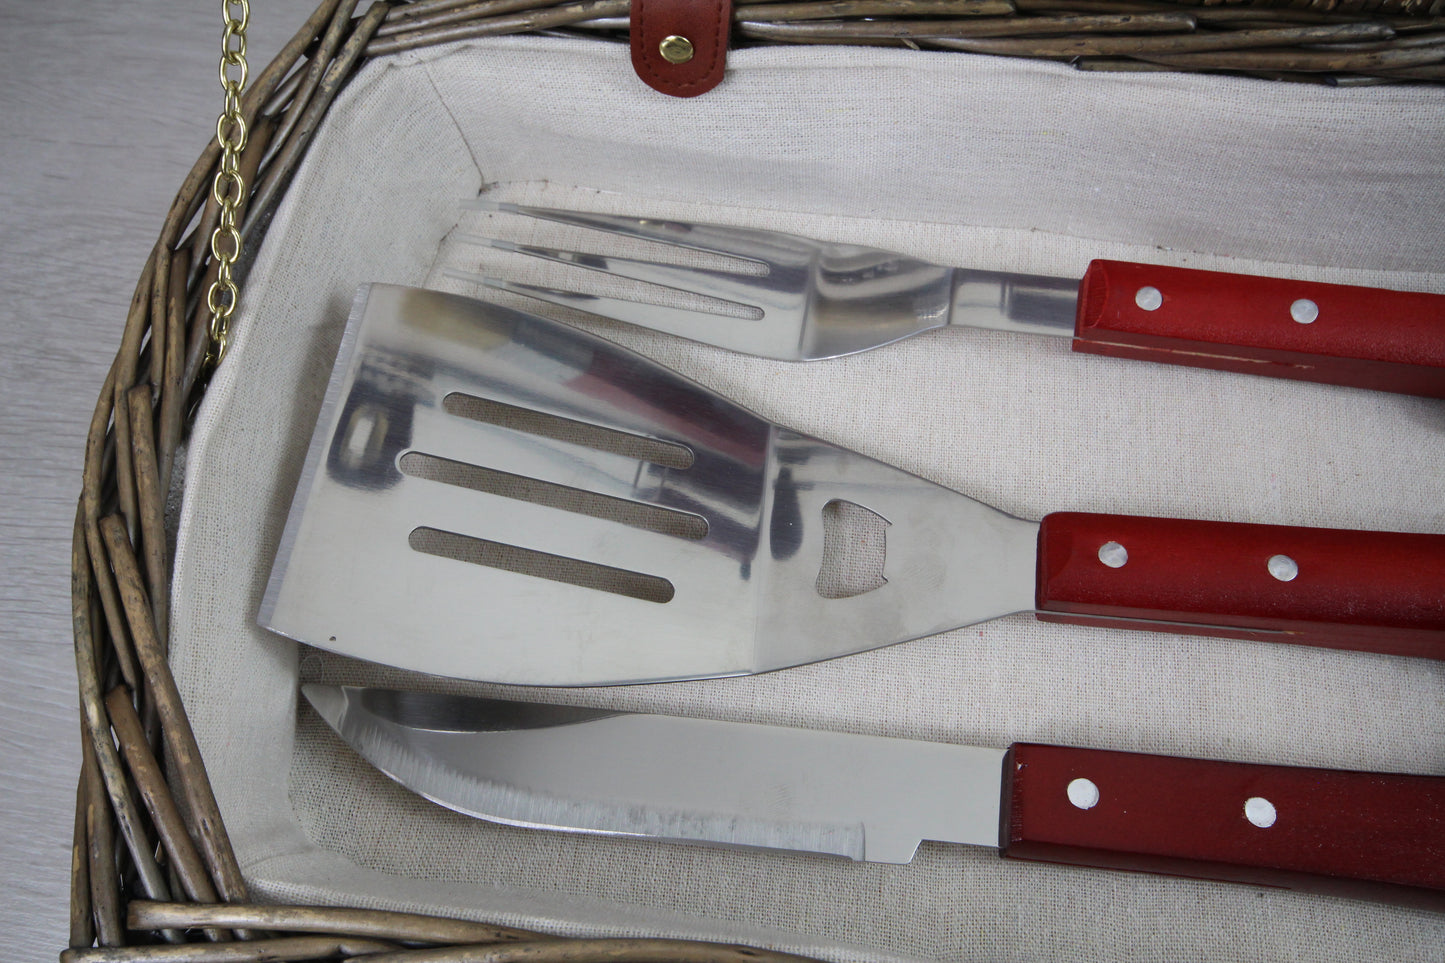 Close up shot of 3 barbecue tools (knife, spatula and fork) inside the case.